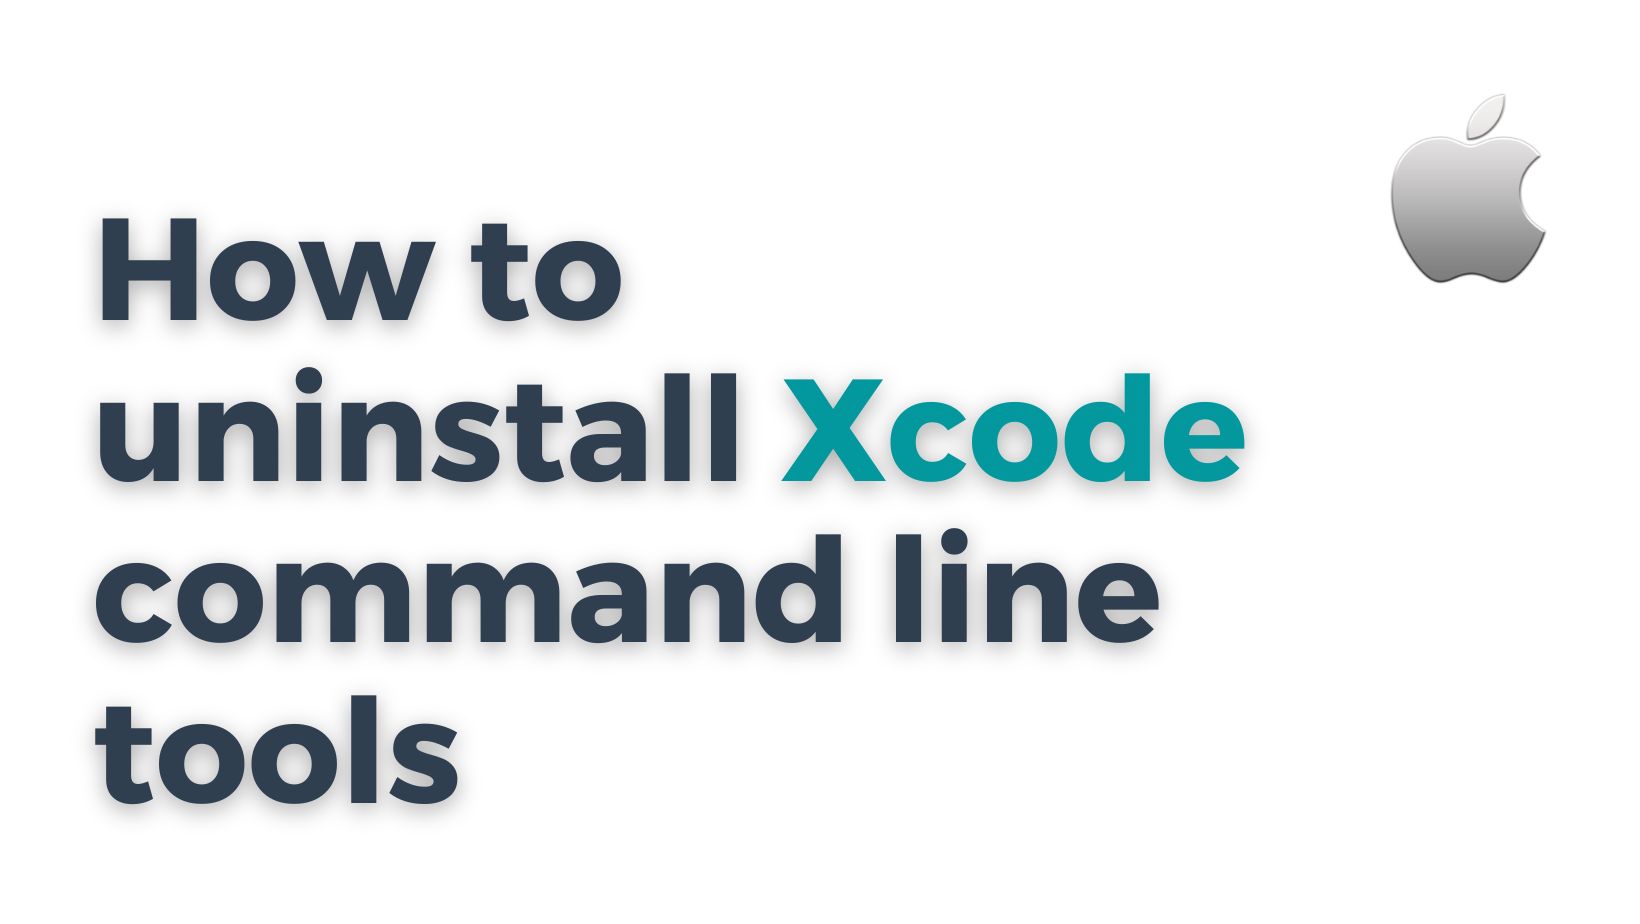 How to uninstall Xcode command line tools